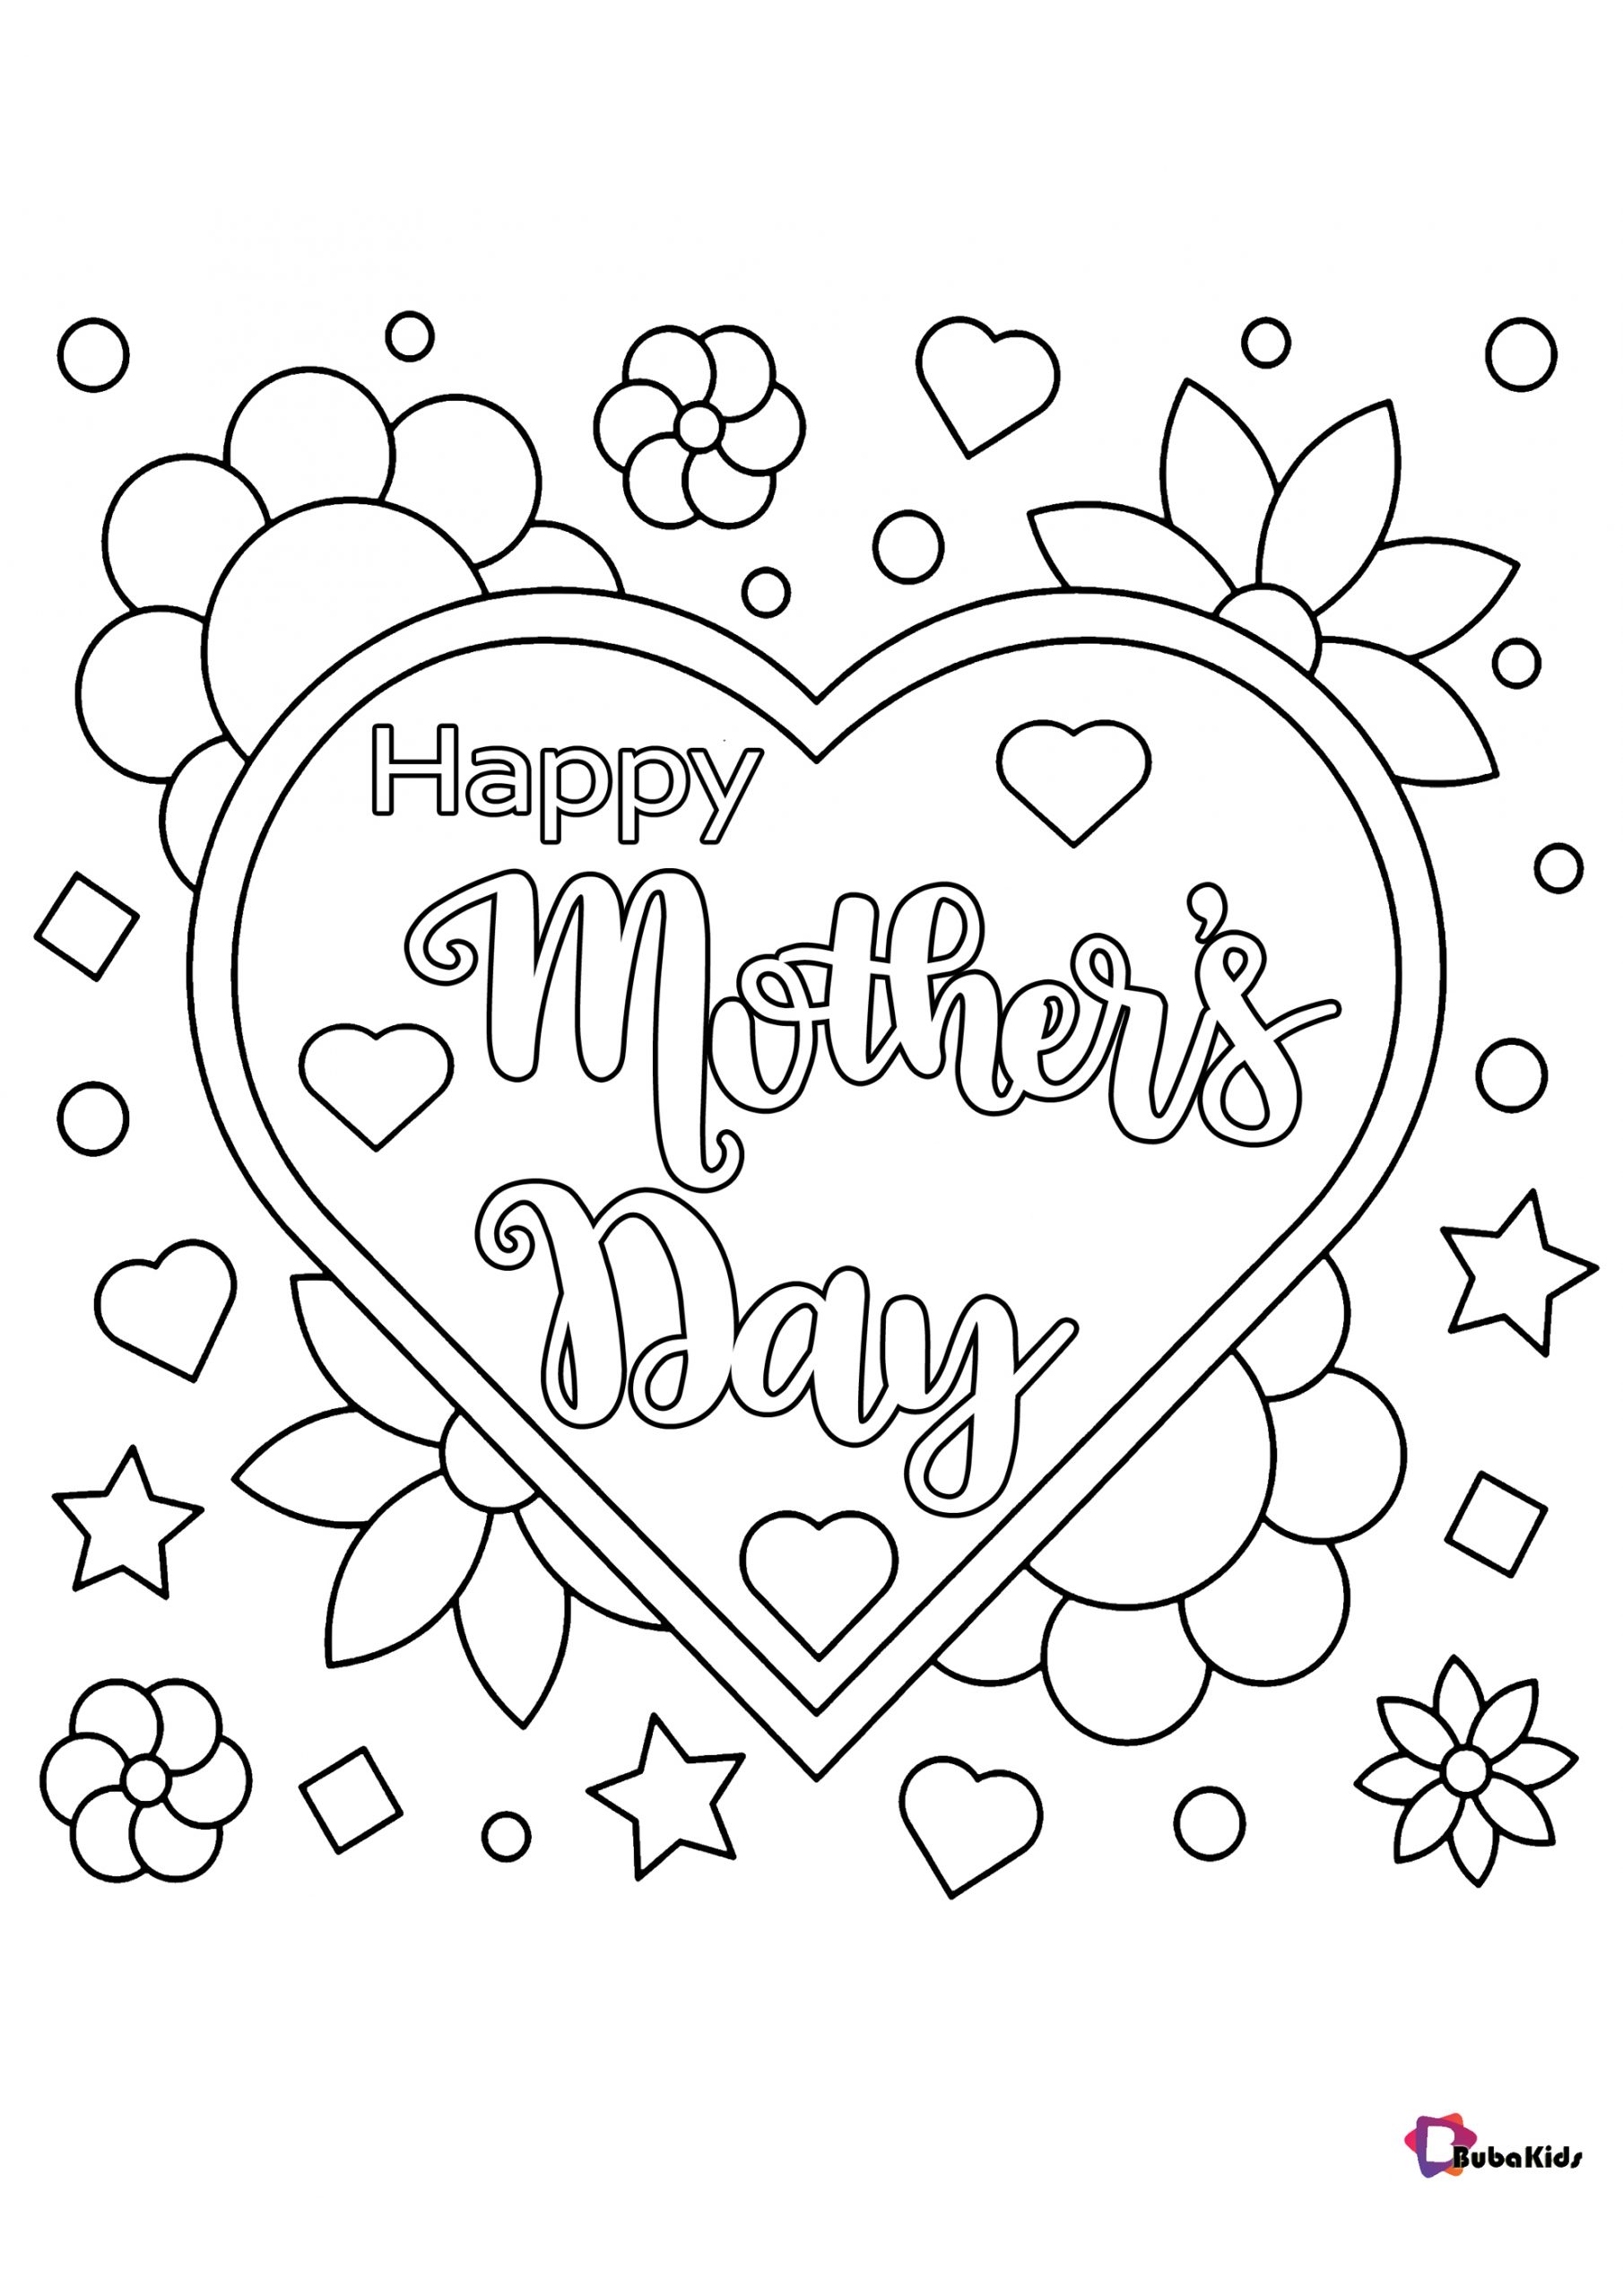 Happy mother’s day coloring pages hearts and flowers Wallpaper